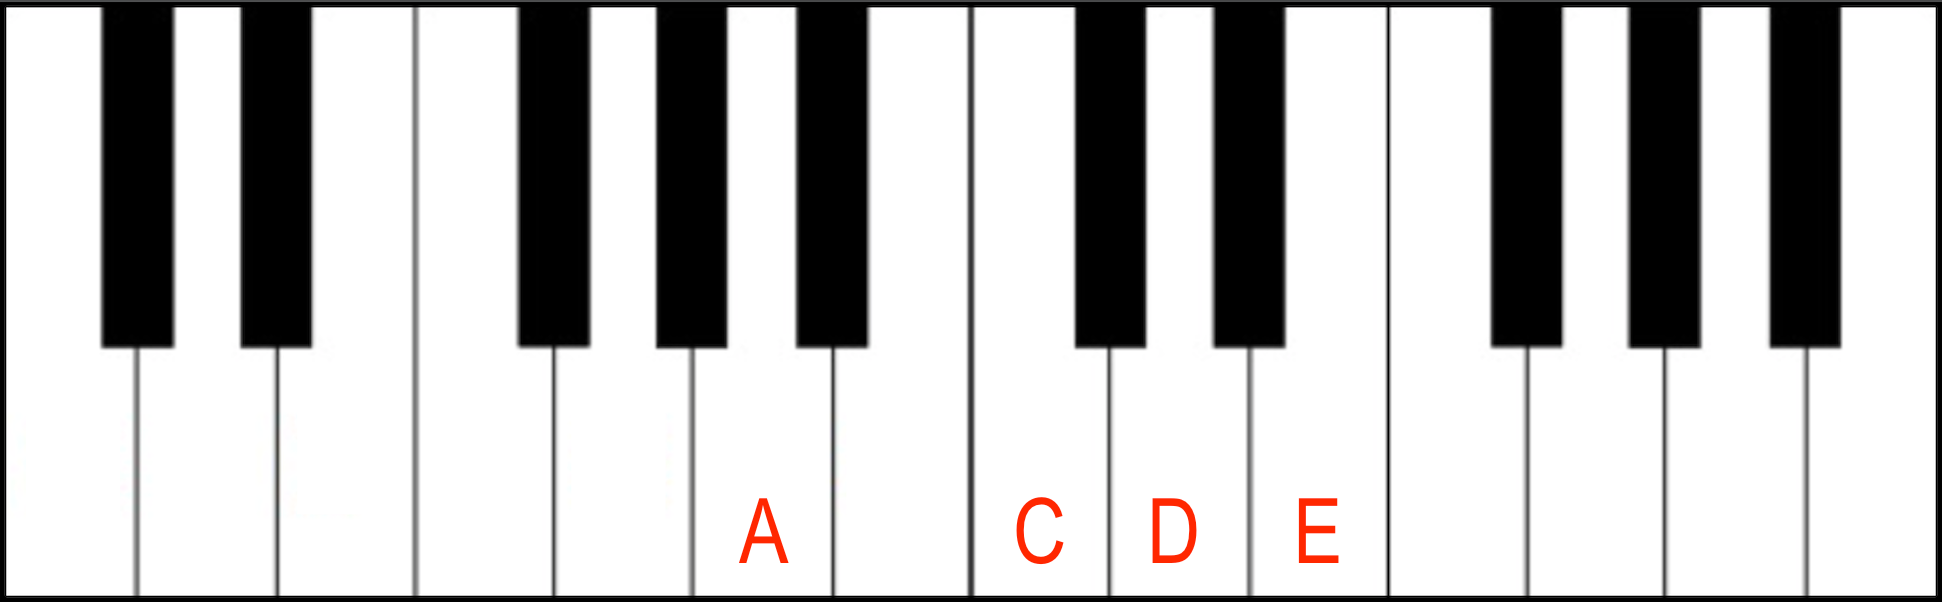 C(6/9) Chord over A